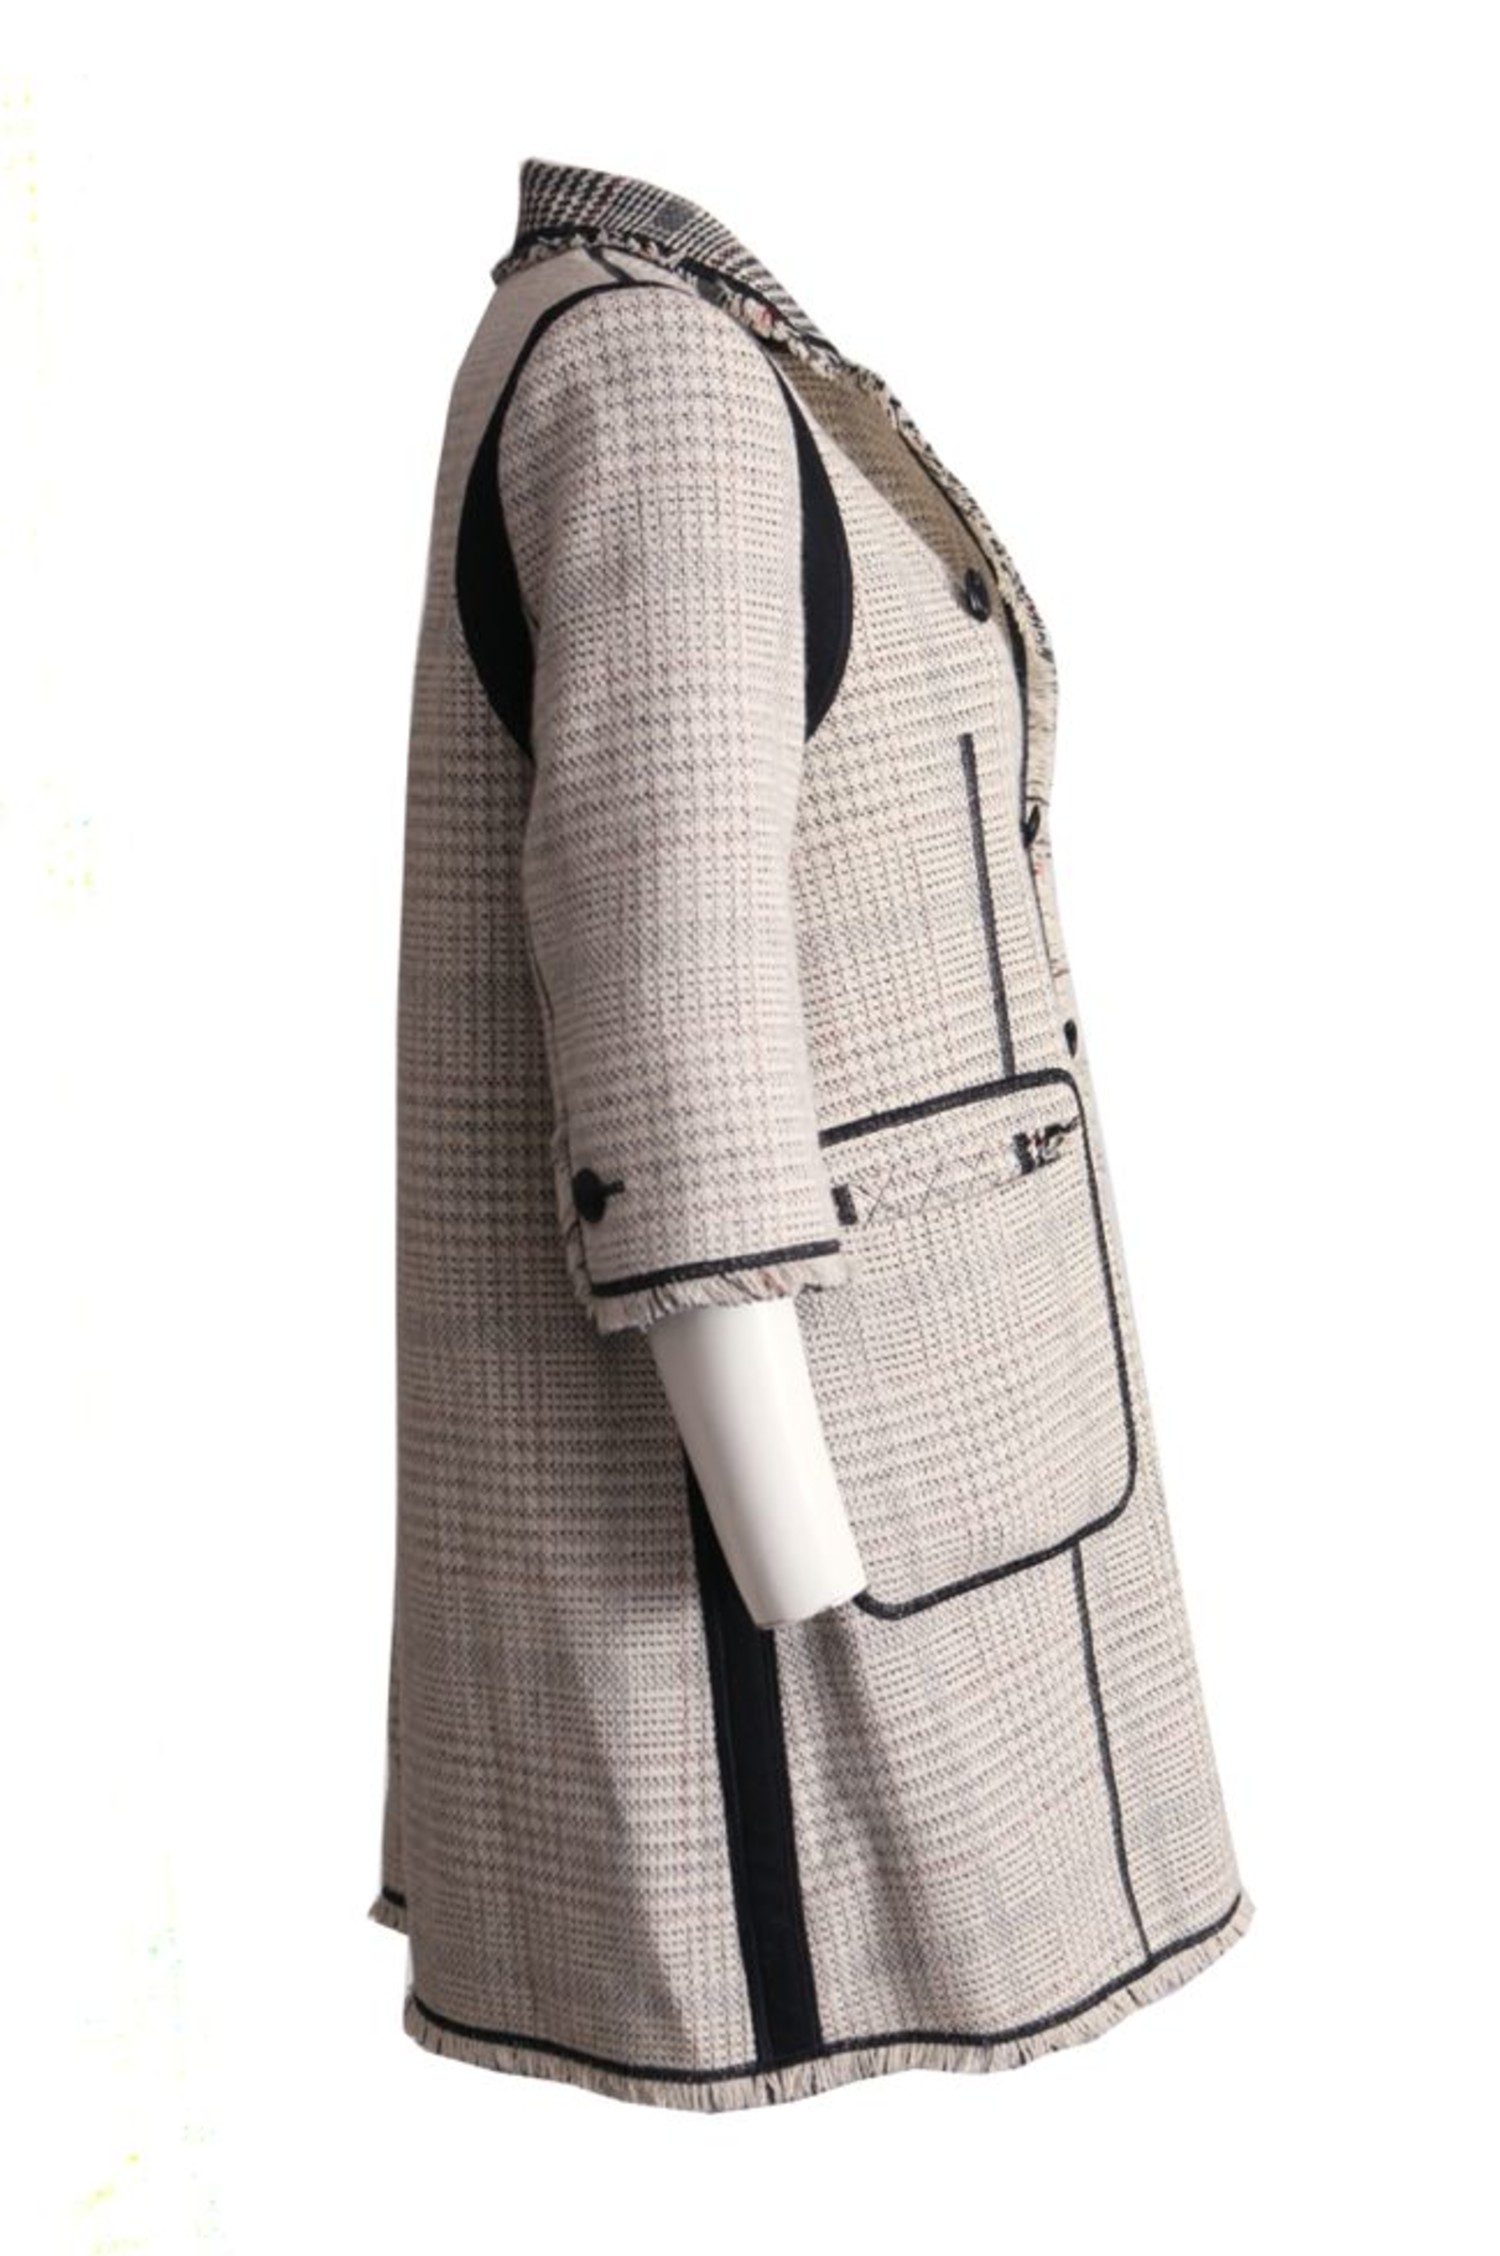 Louis Vuitton, black/white tweed coat with ¾ sleeves in size FR40